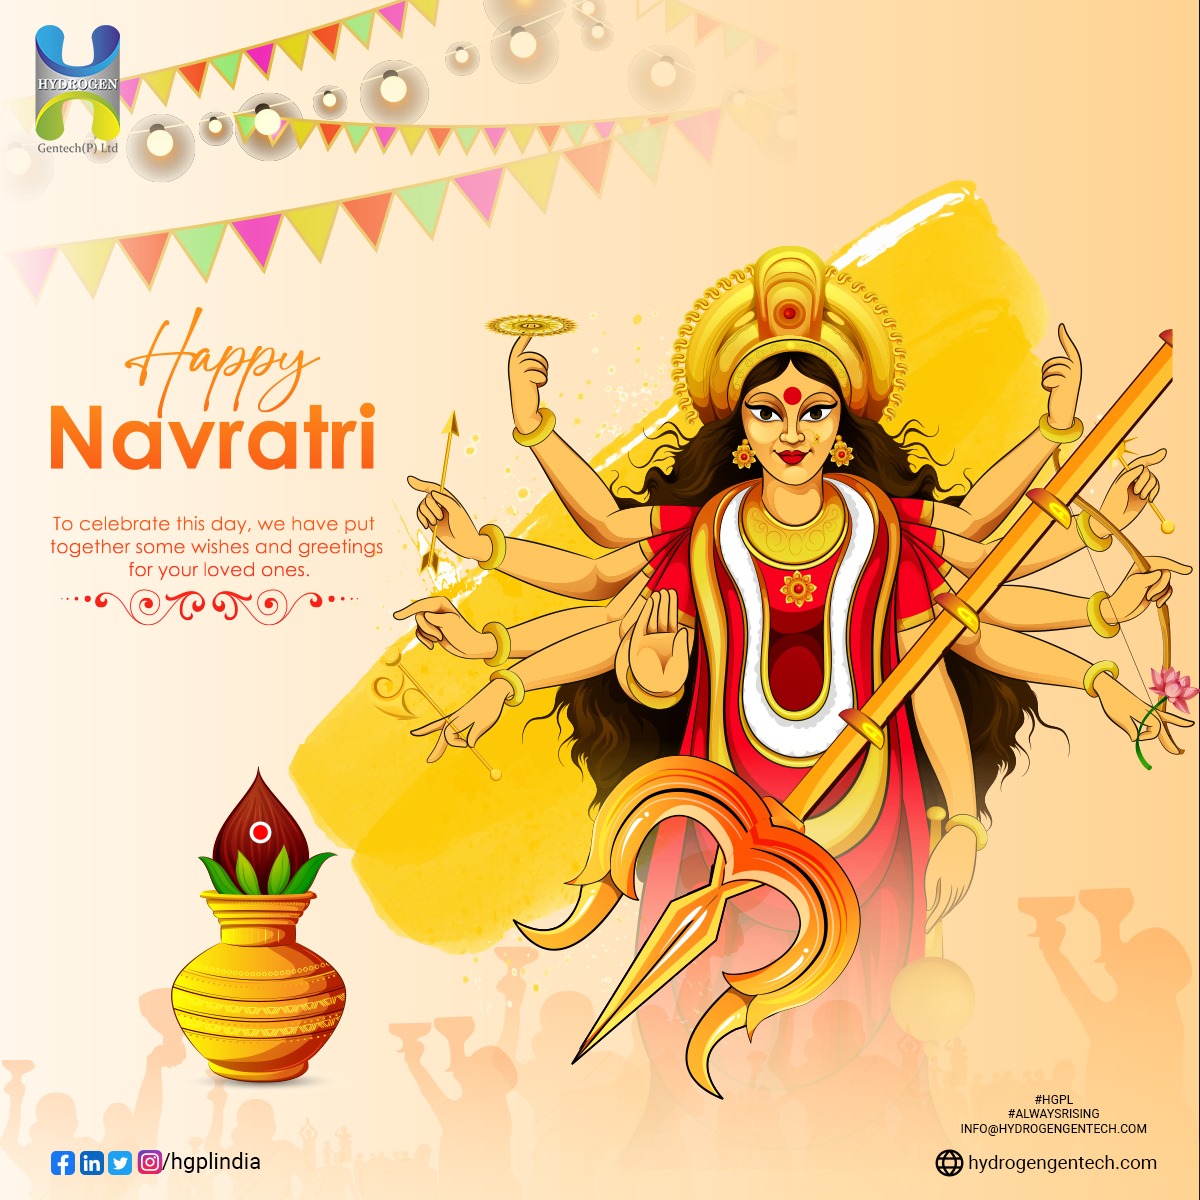 🌟Wishing everyone a joyous Navratri filled with happiness, prosperity, and endless energy! 🙏✨ This Navratri, let's pledge to empower our planet with clean, green energy solutions. Together, let's light up the world with the brilliance of hydrogen! 🎉 #Navratri #HGPL 🌿🌈